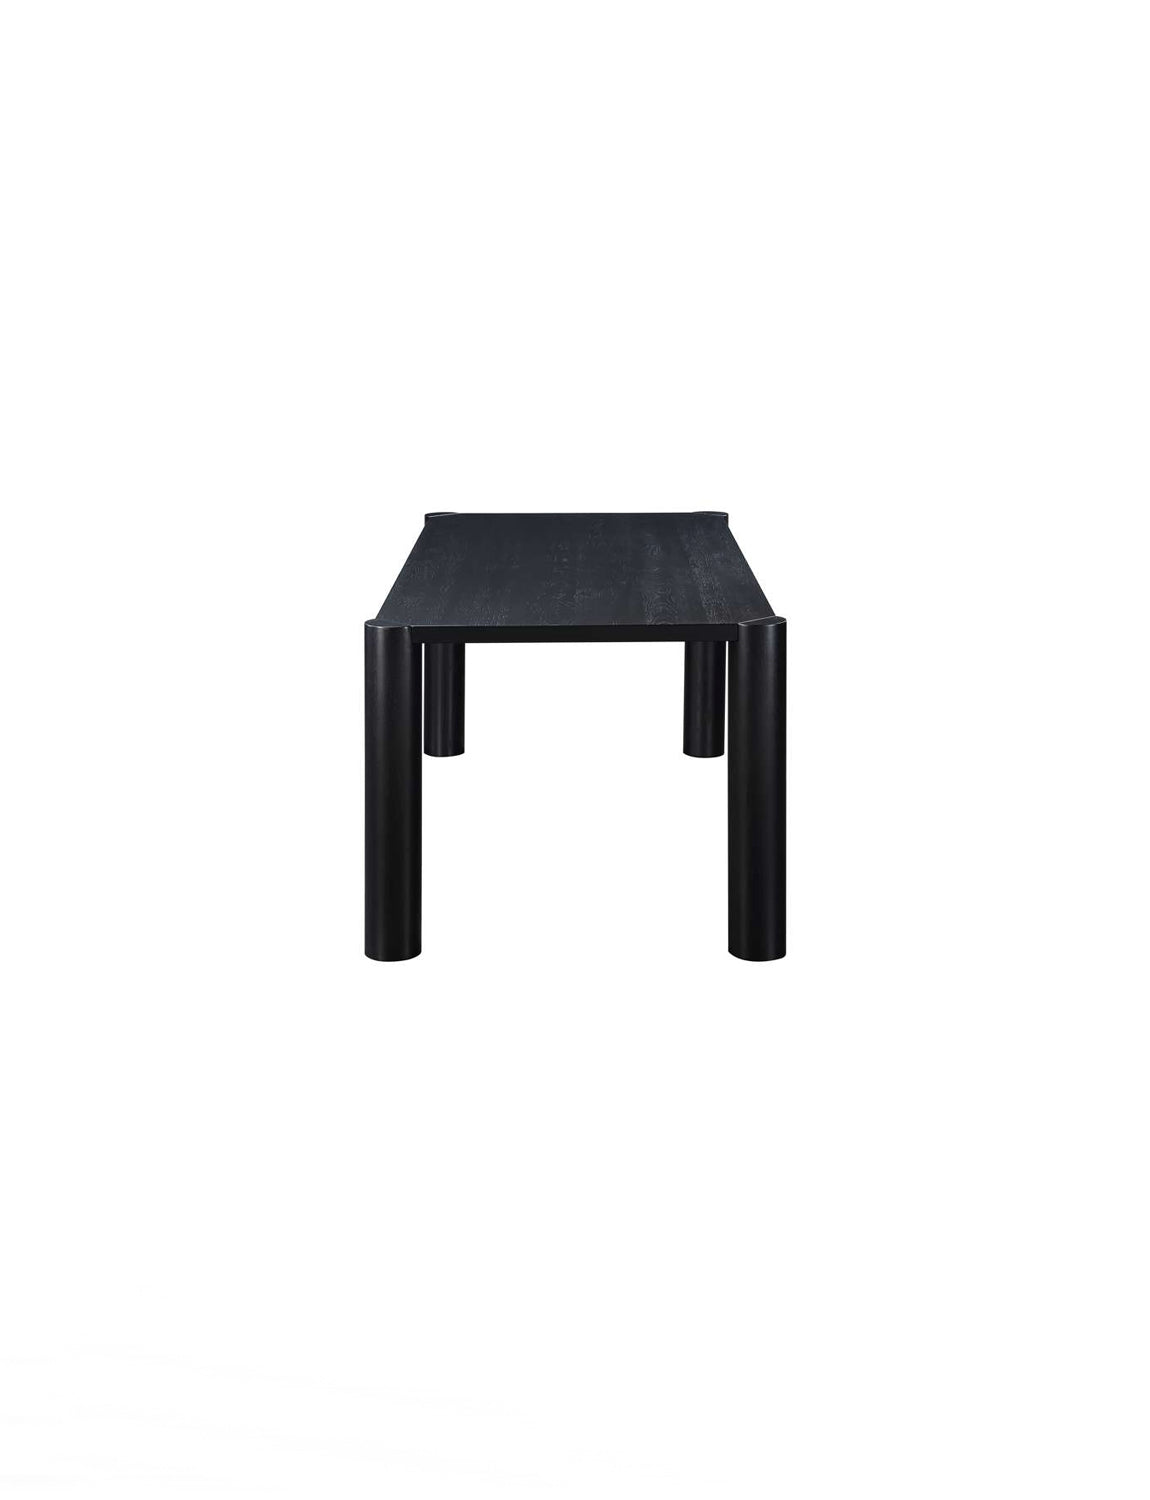 Lemy Small Dining Table